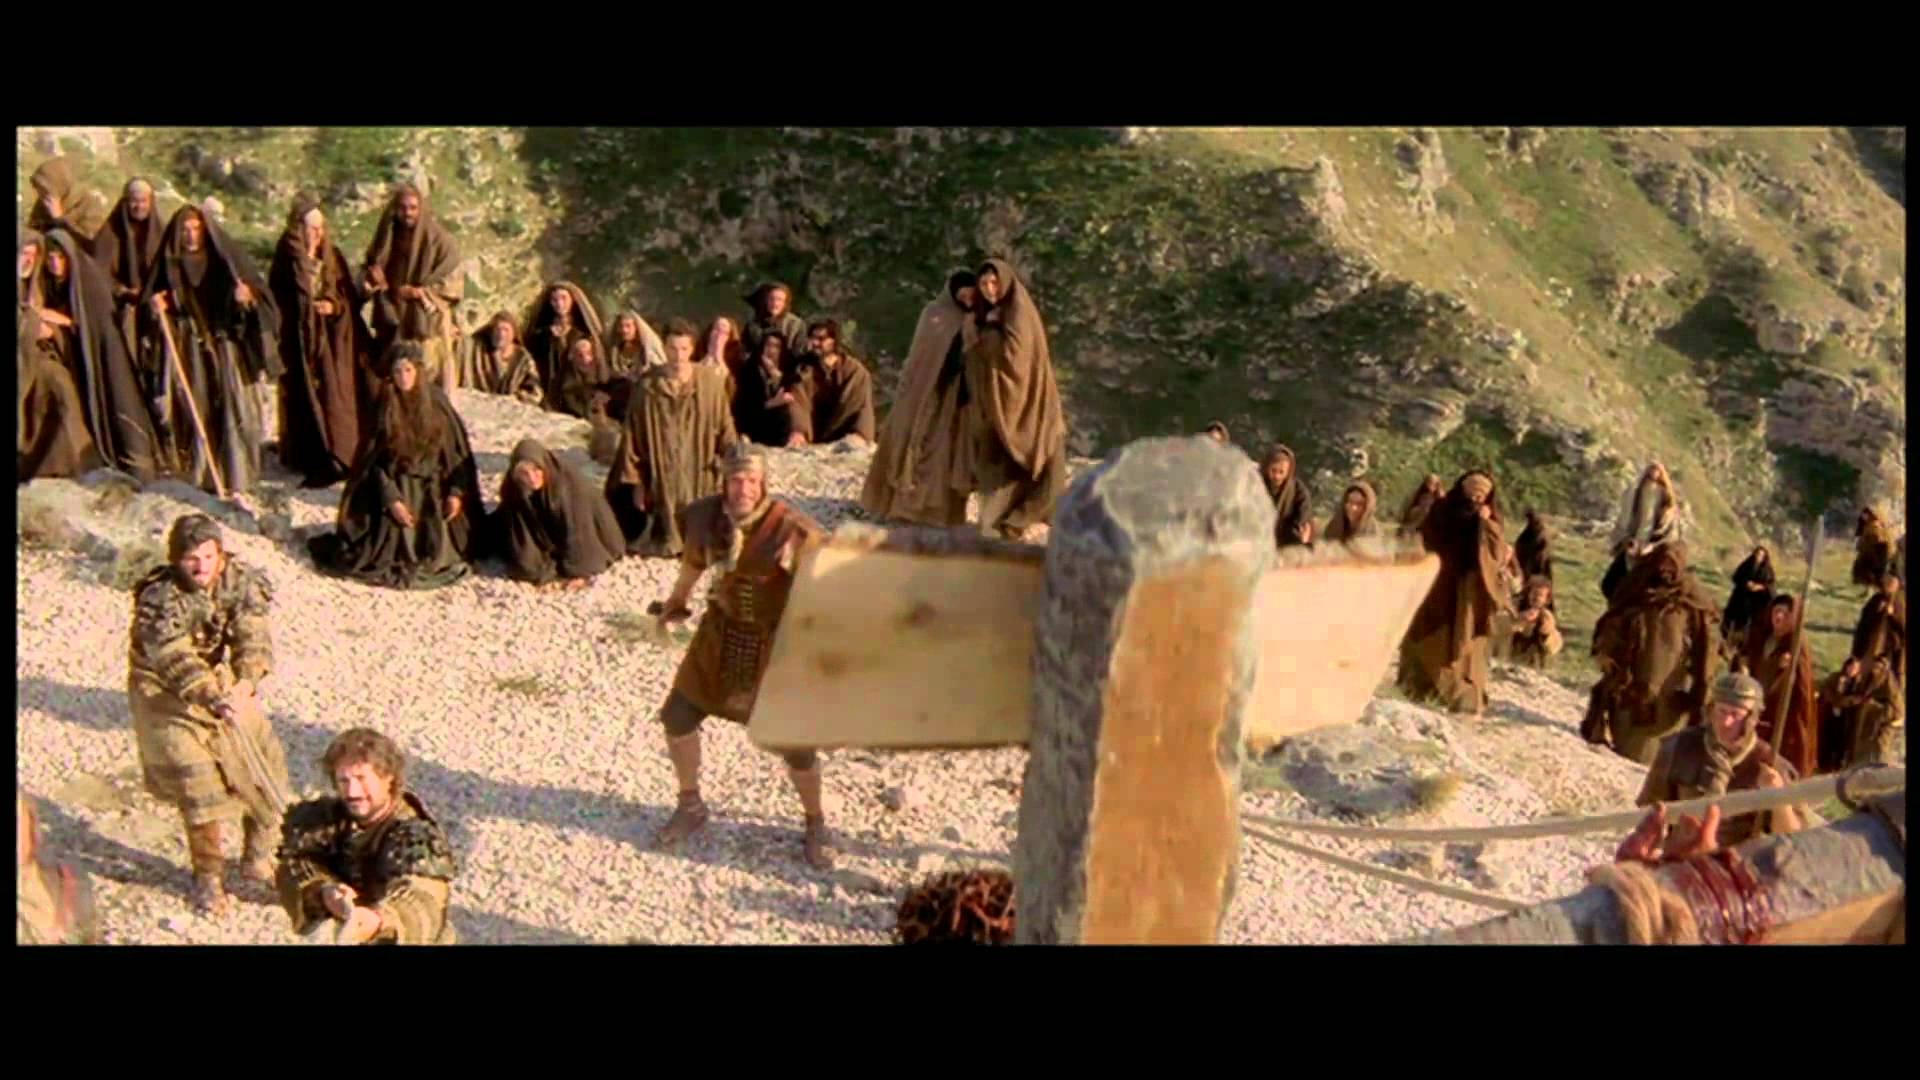 The Passion Of The Christ Official® Trailer [HD].1080p.mp4